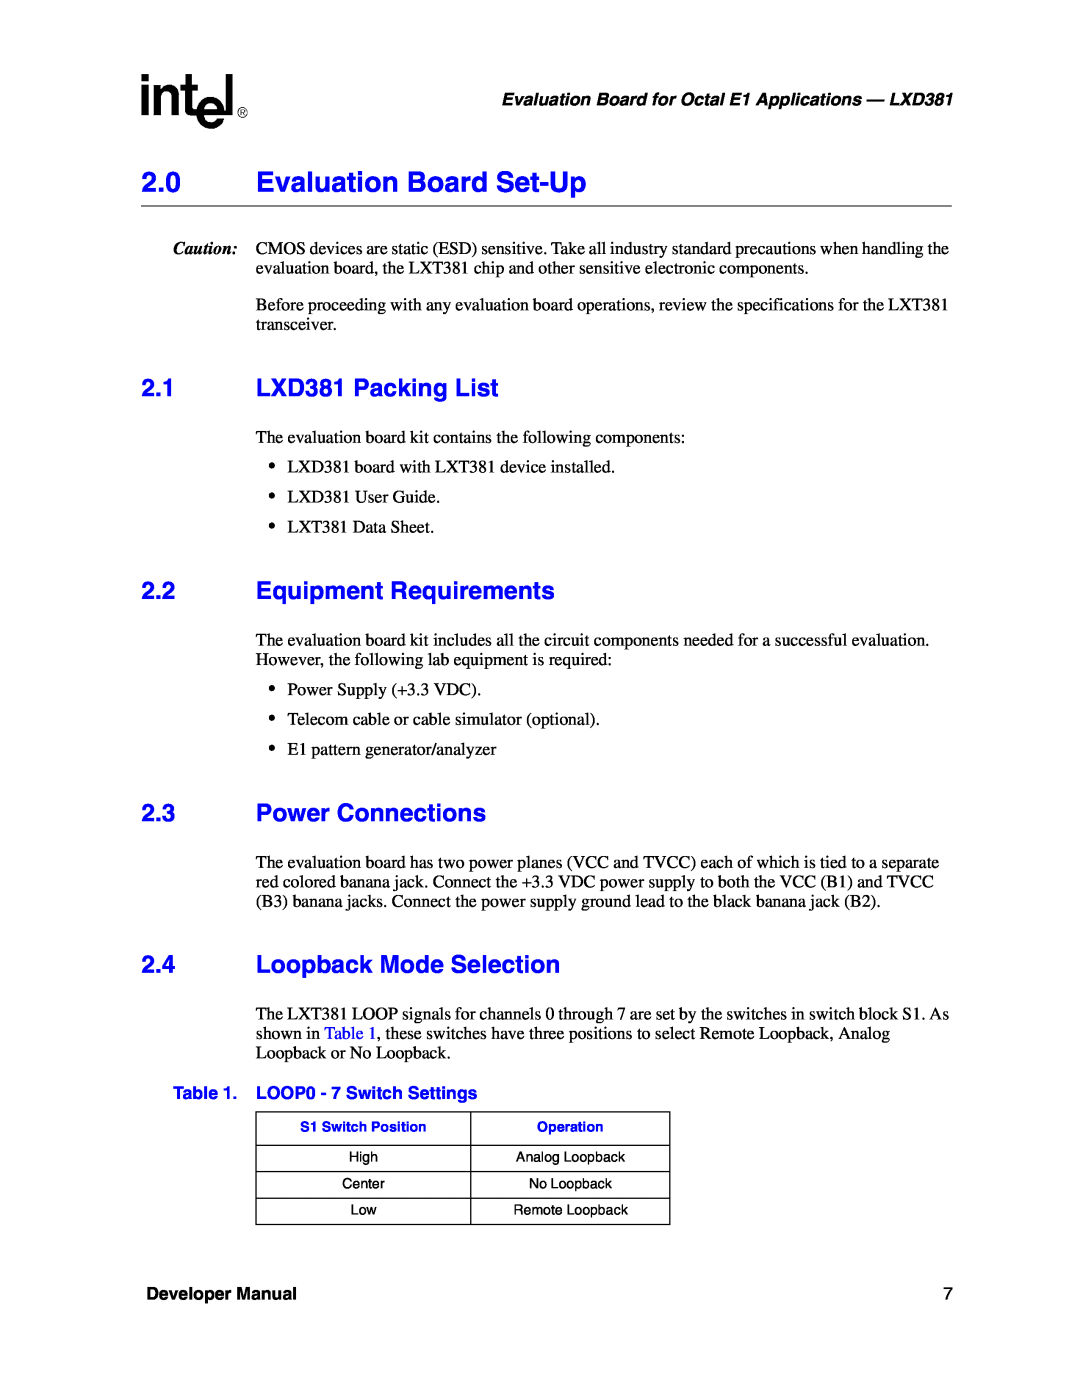 Intel Evaluation Board Set-Up, 2.1 LXD381 Packing List, Equipment Requirements, Power Connections, Developer Manual 